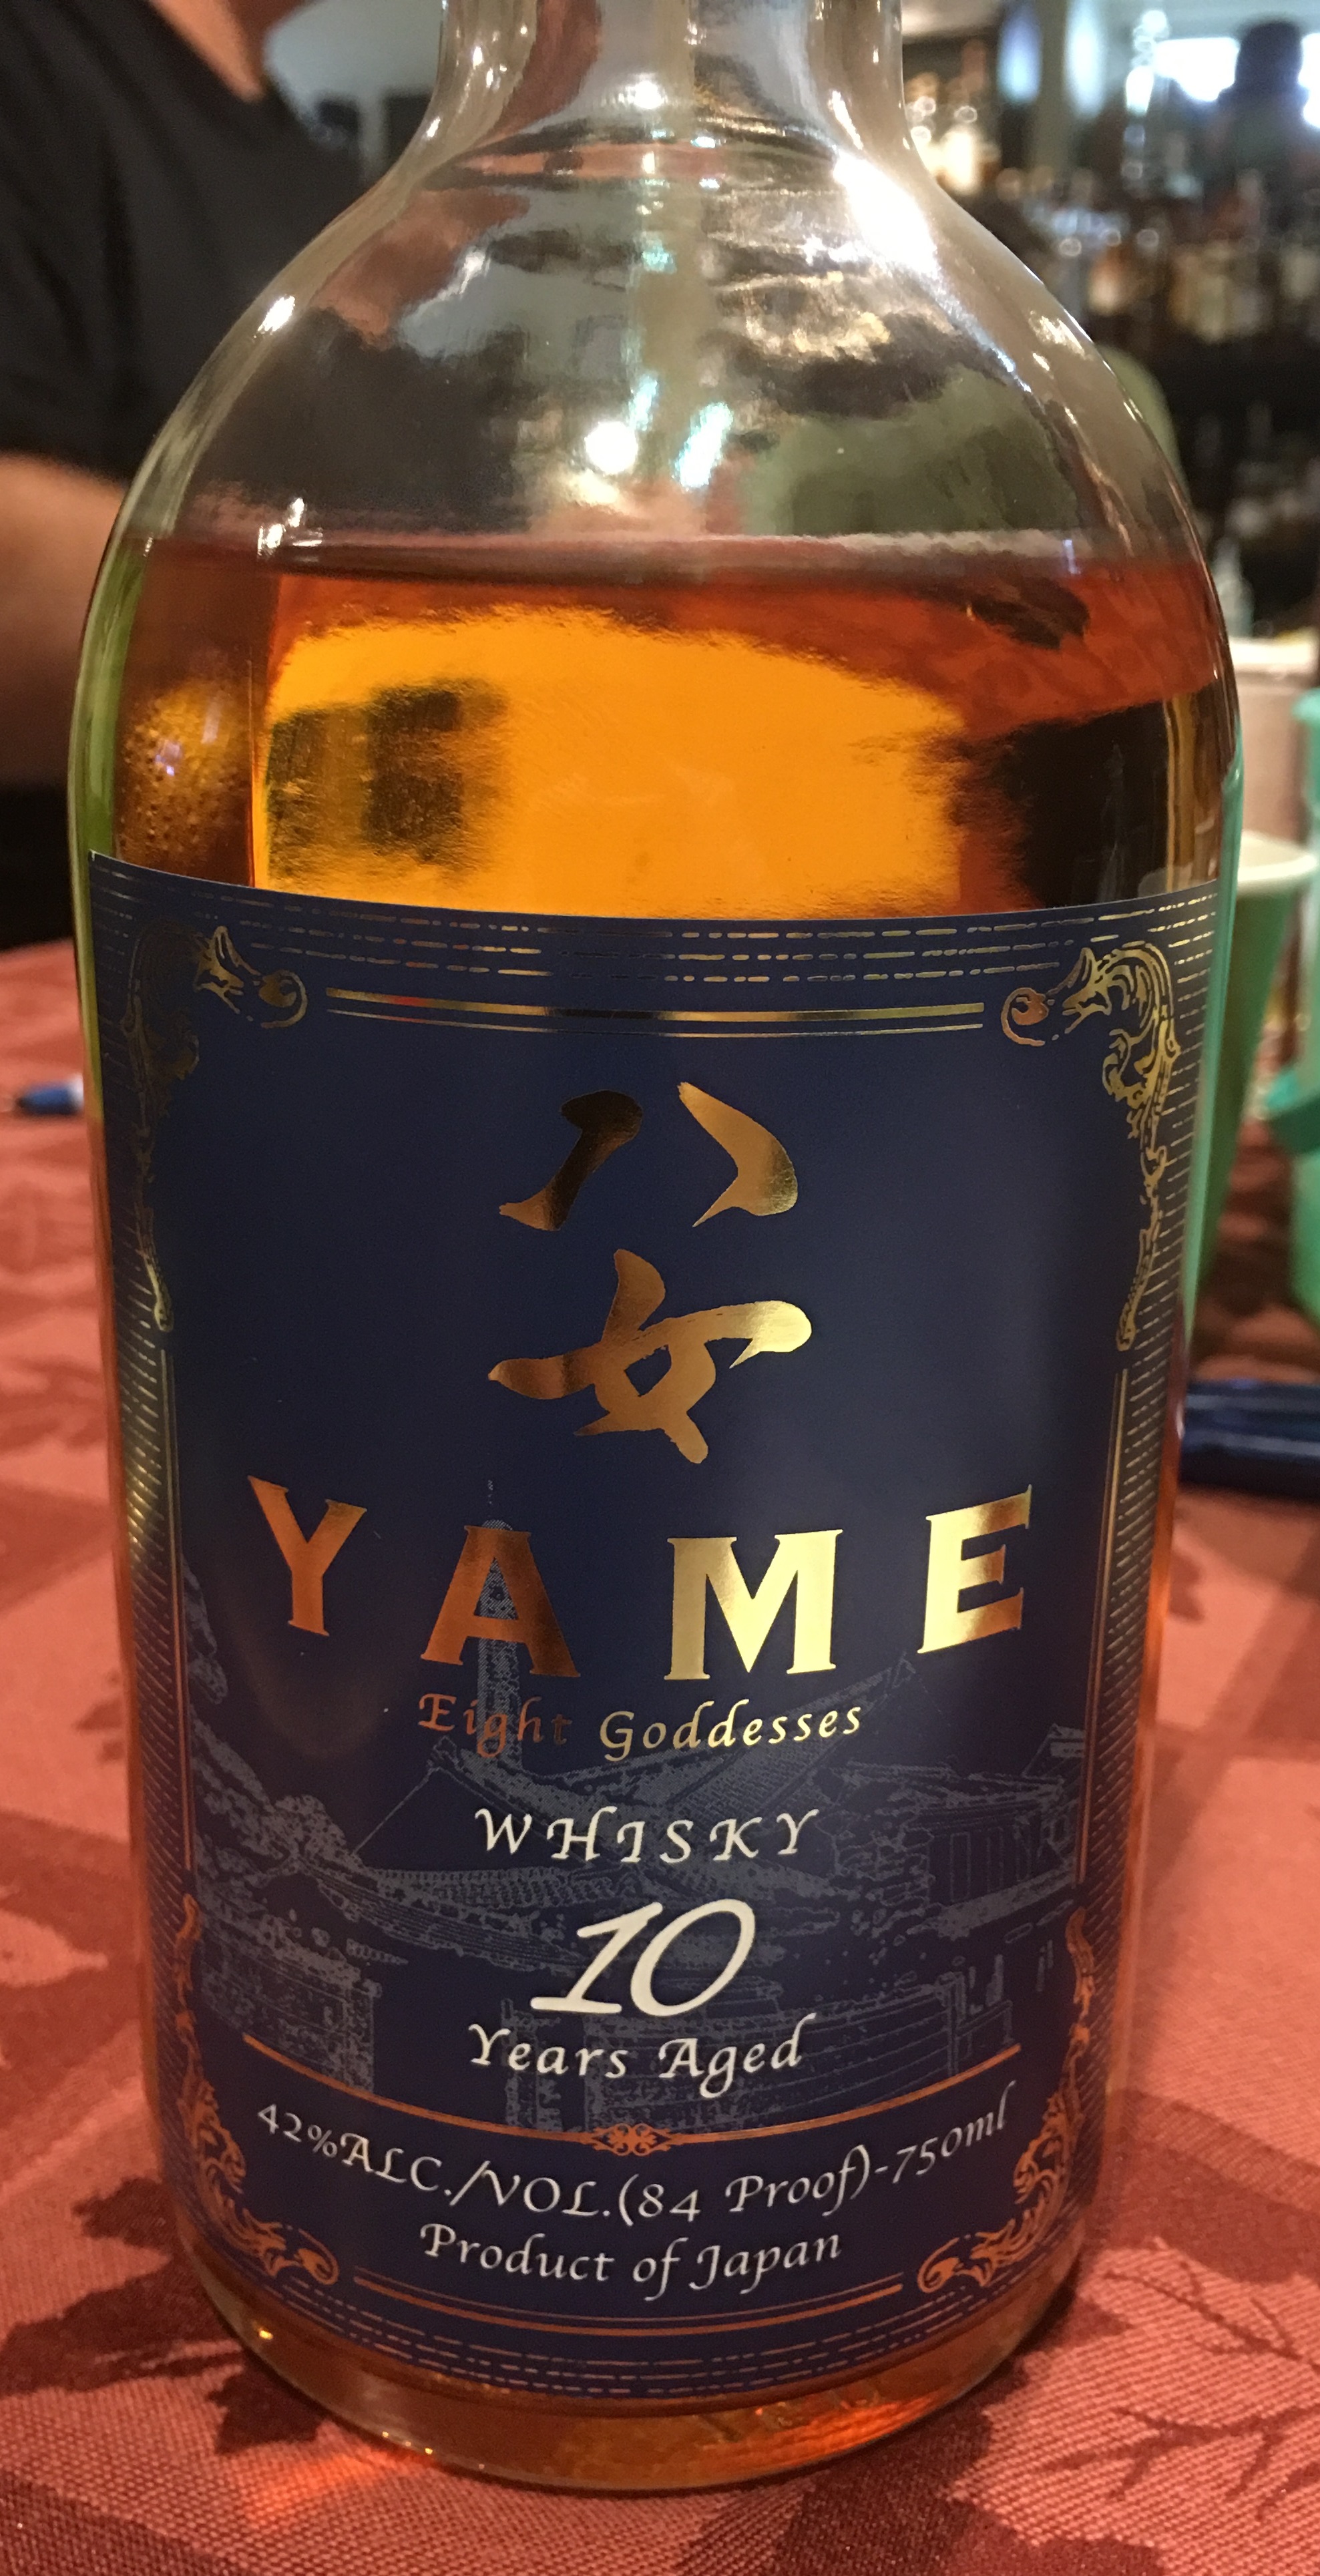 Yame Eight Goddesses 10 Year Whisky